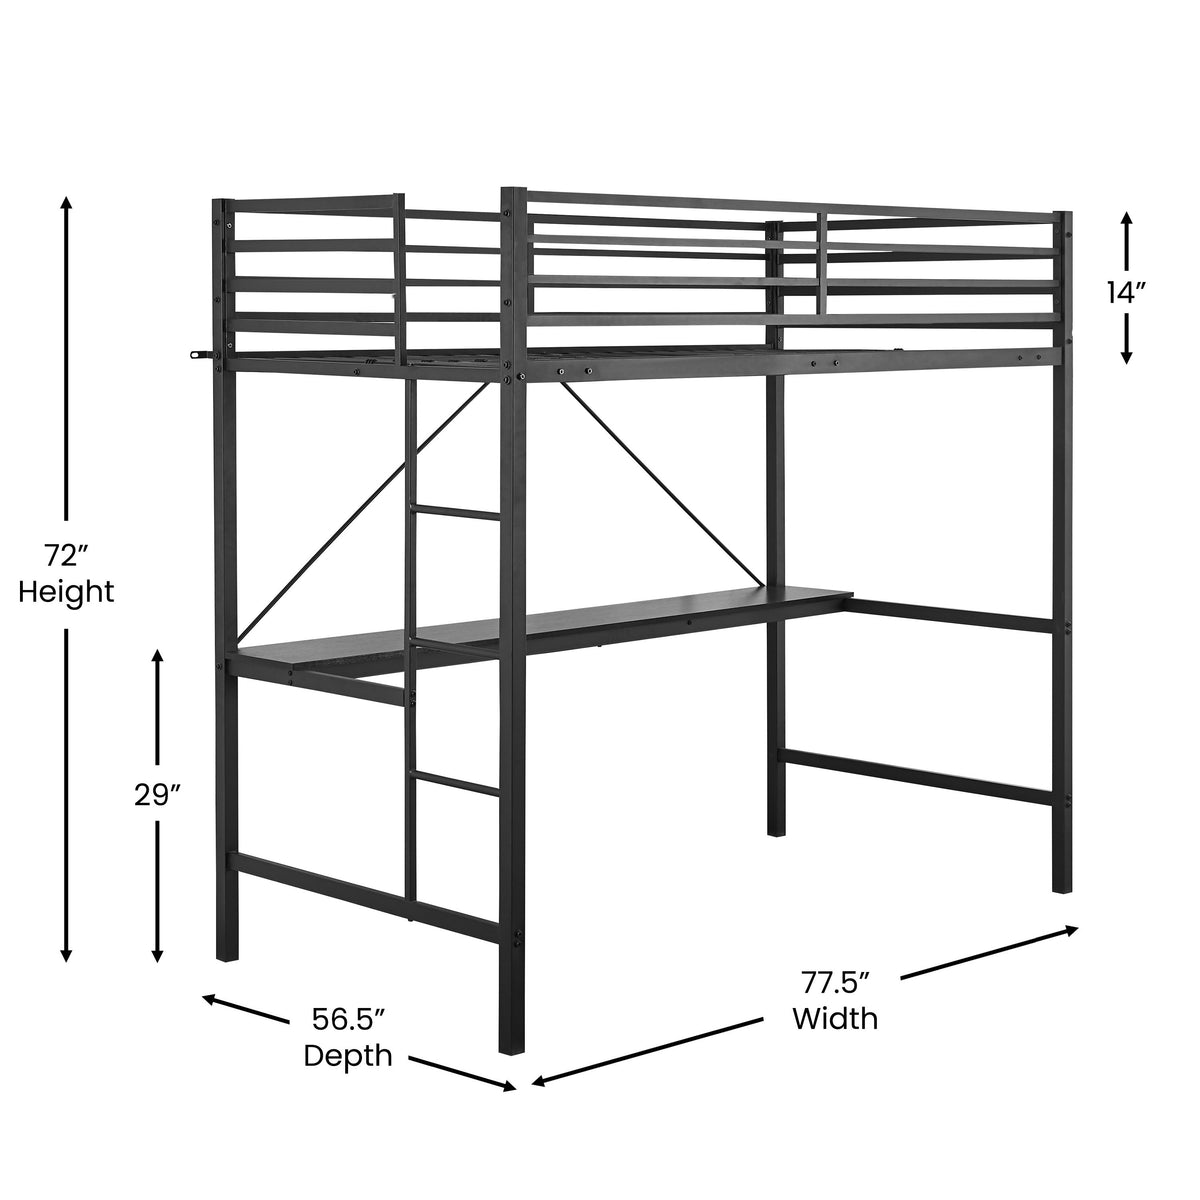 Black |#| Sturdy Metal Loft Bed Frame in Black with Desk and Safety Rails - Twin